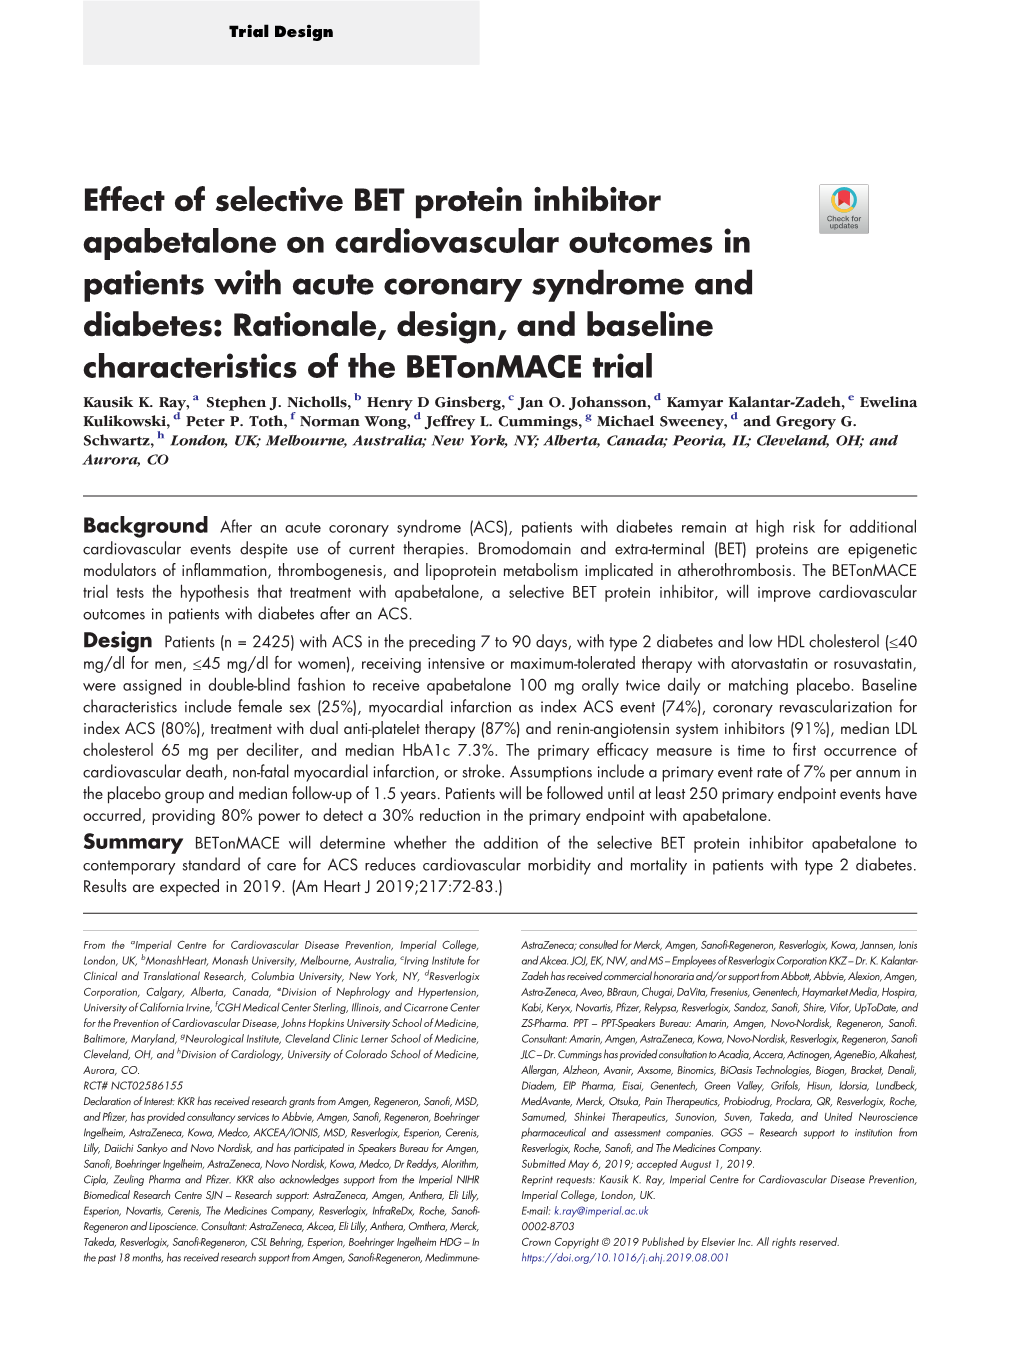 Effect of Selective BET Protein Inhibitor Apabetalone on Cardiovascular